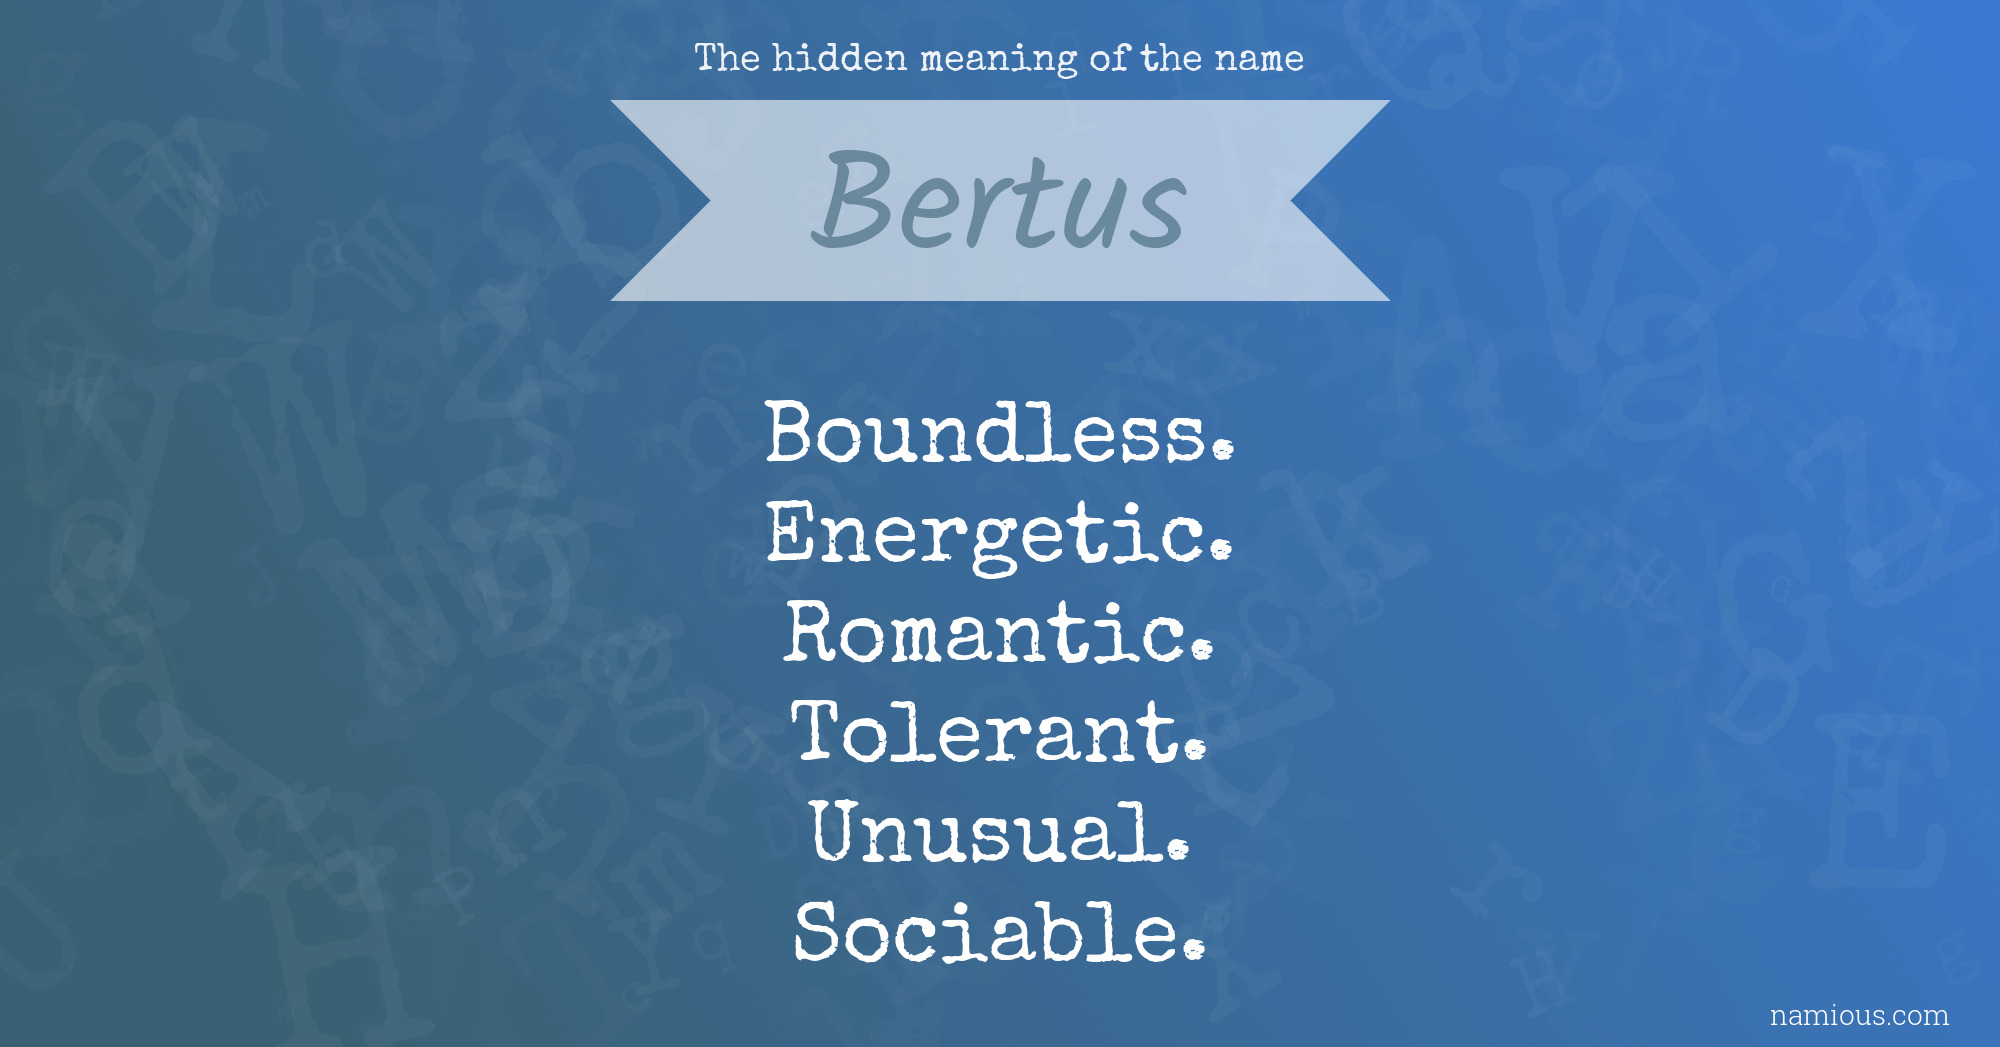 The hidden meaning of the name Bertus